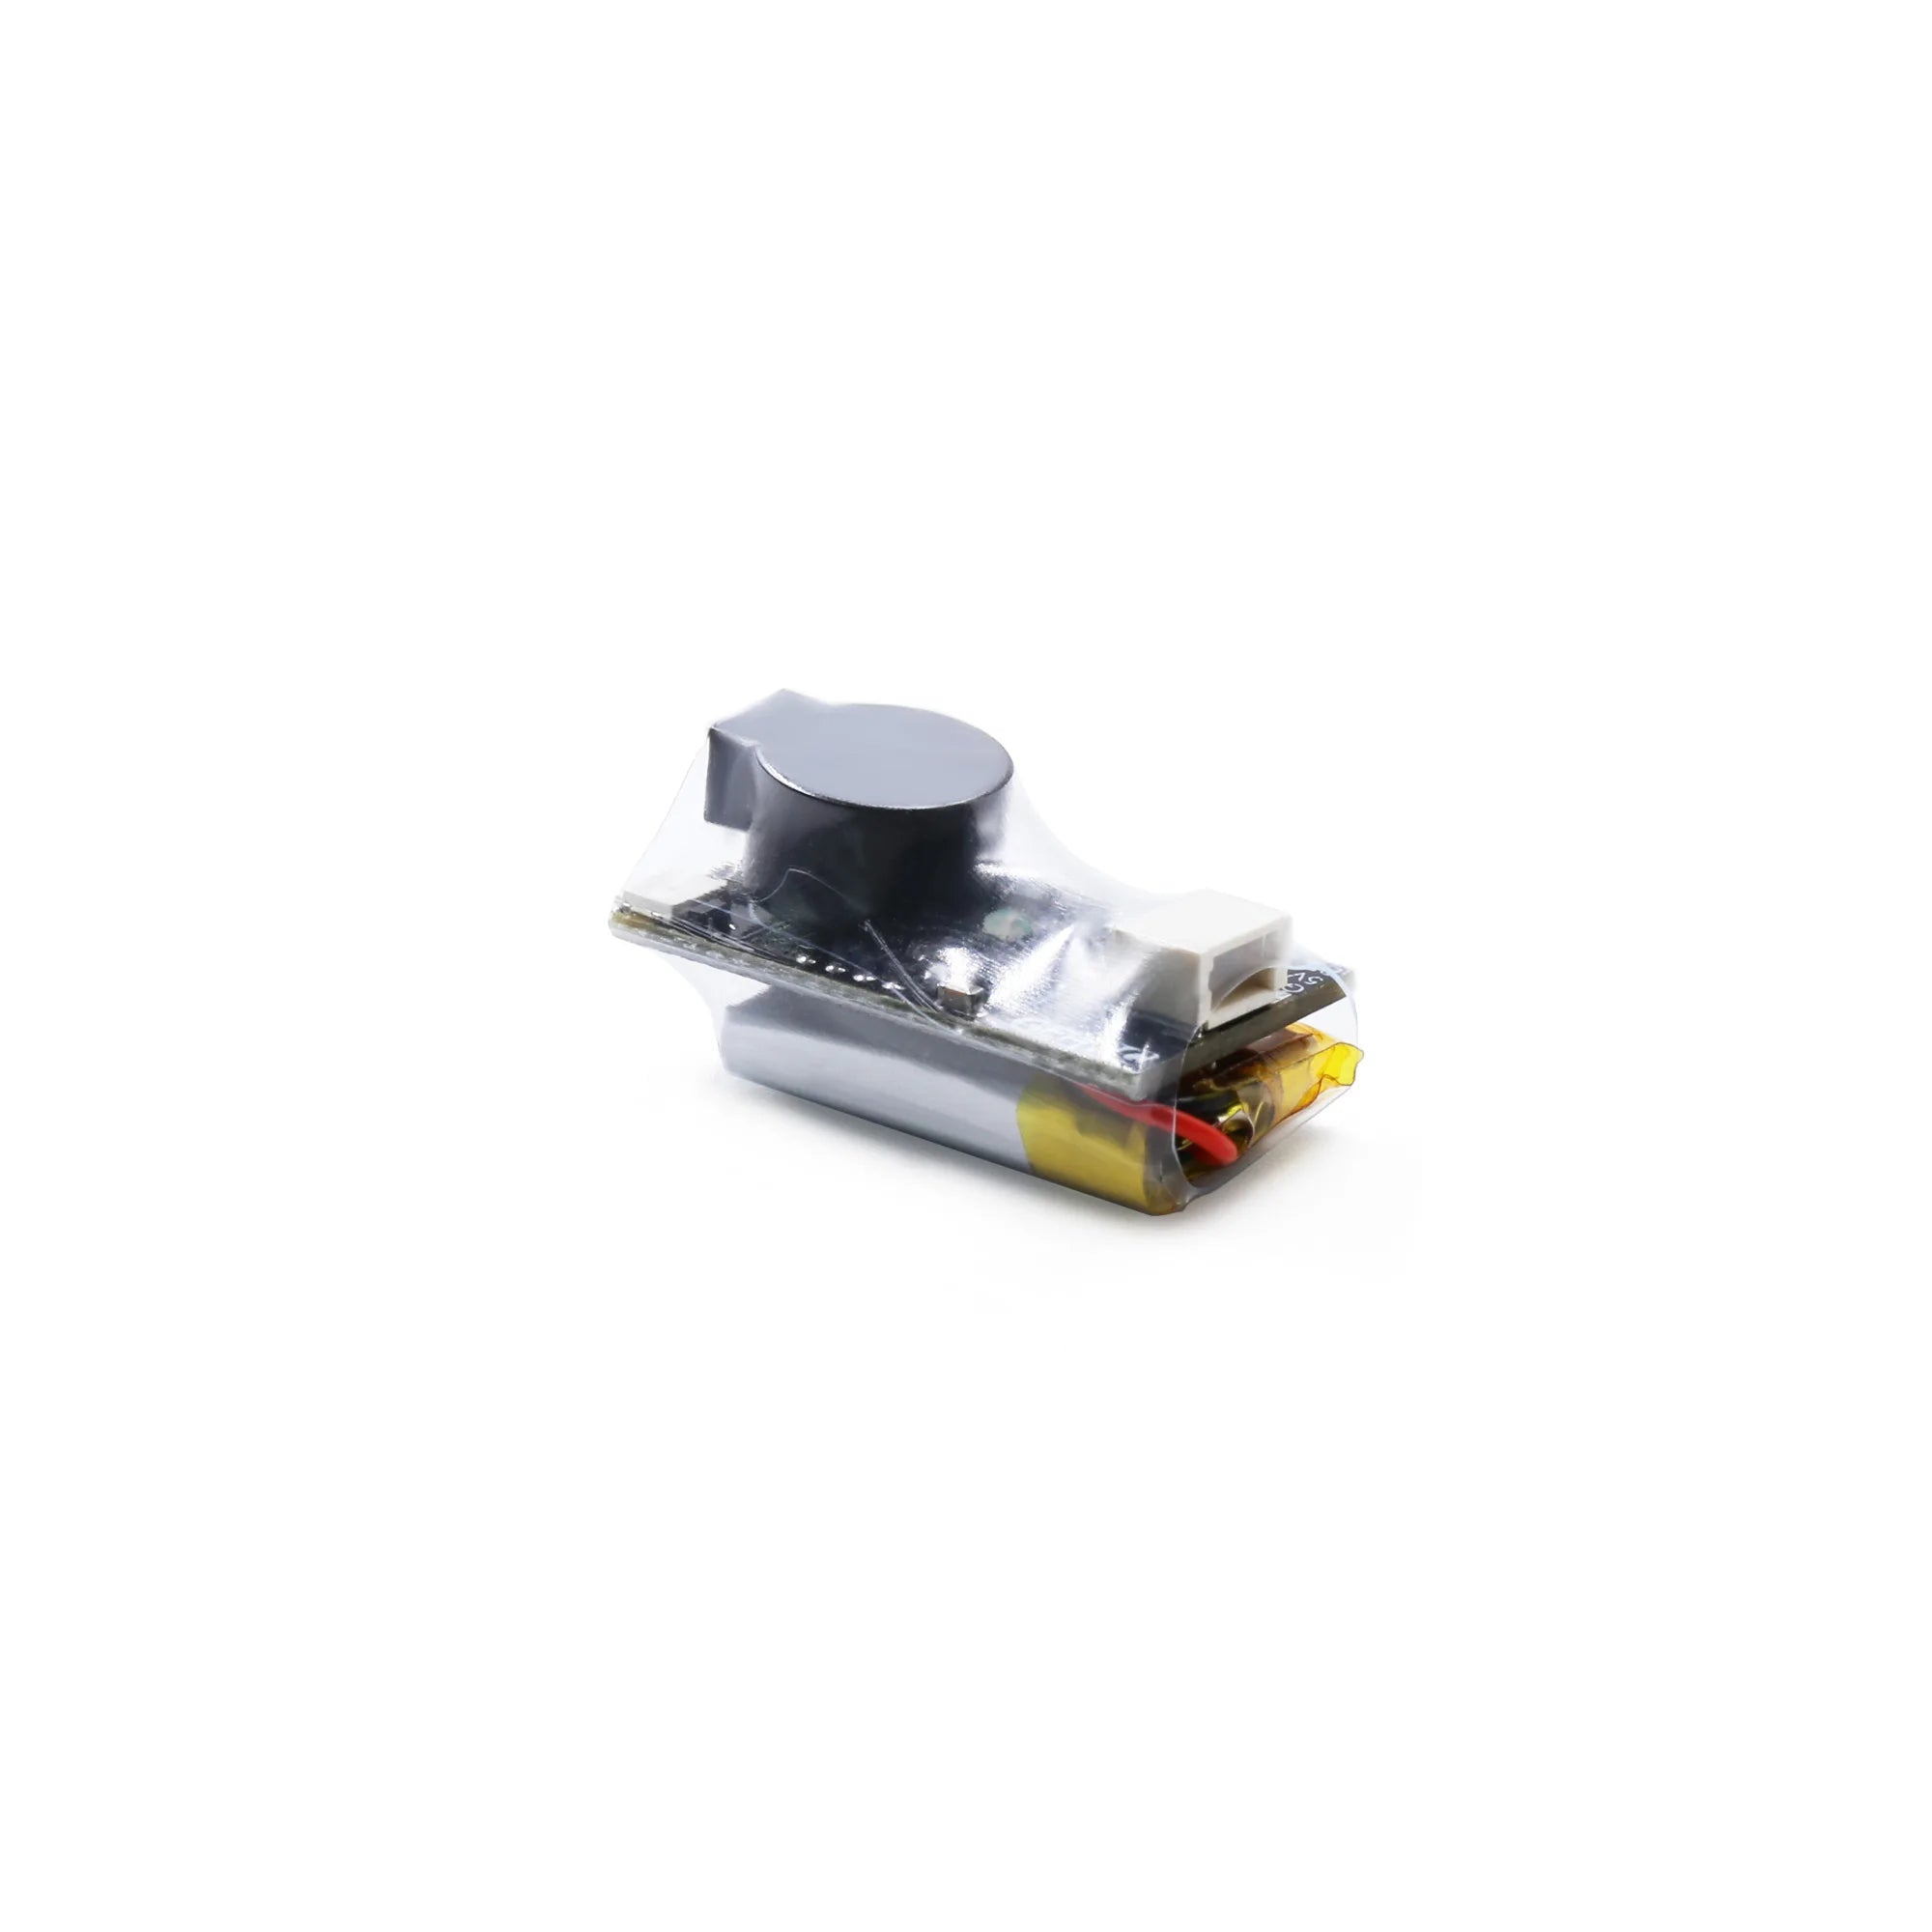 GEPRC Super Buzzer, the FPV lost can be alarmed by sound . it will increase the probability of